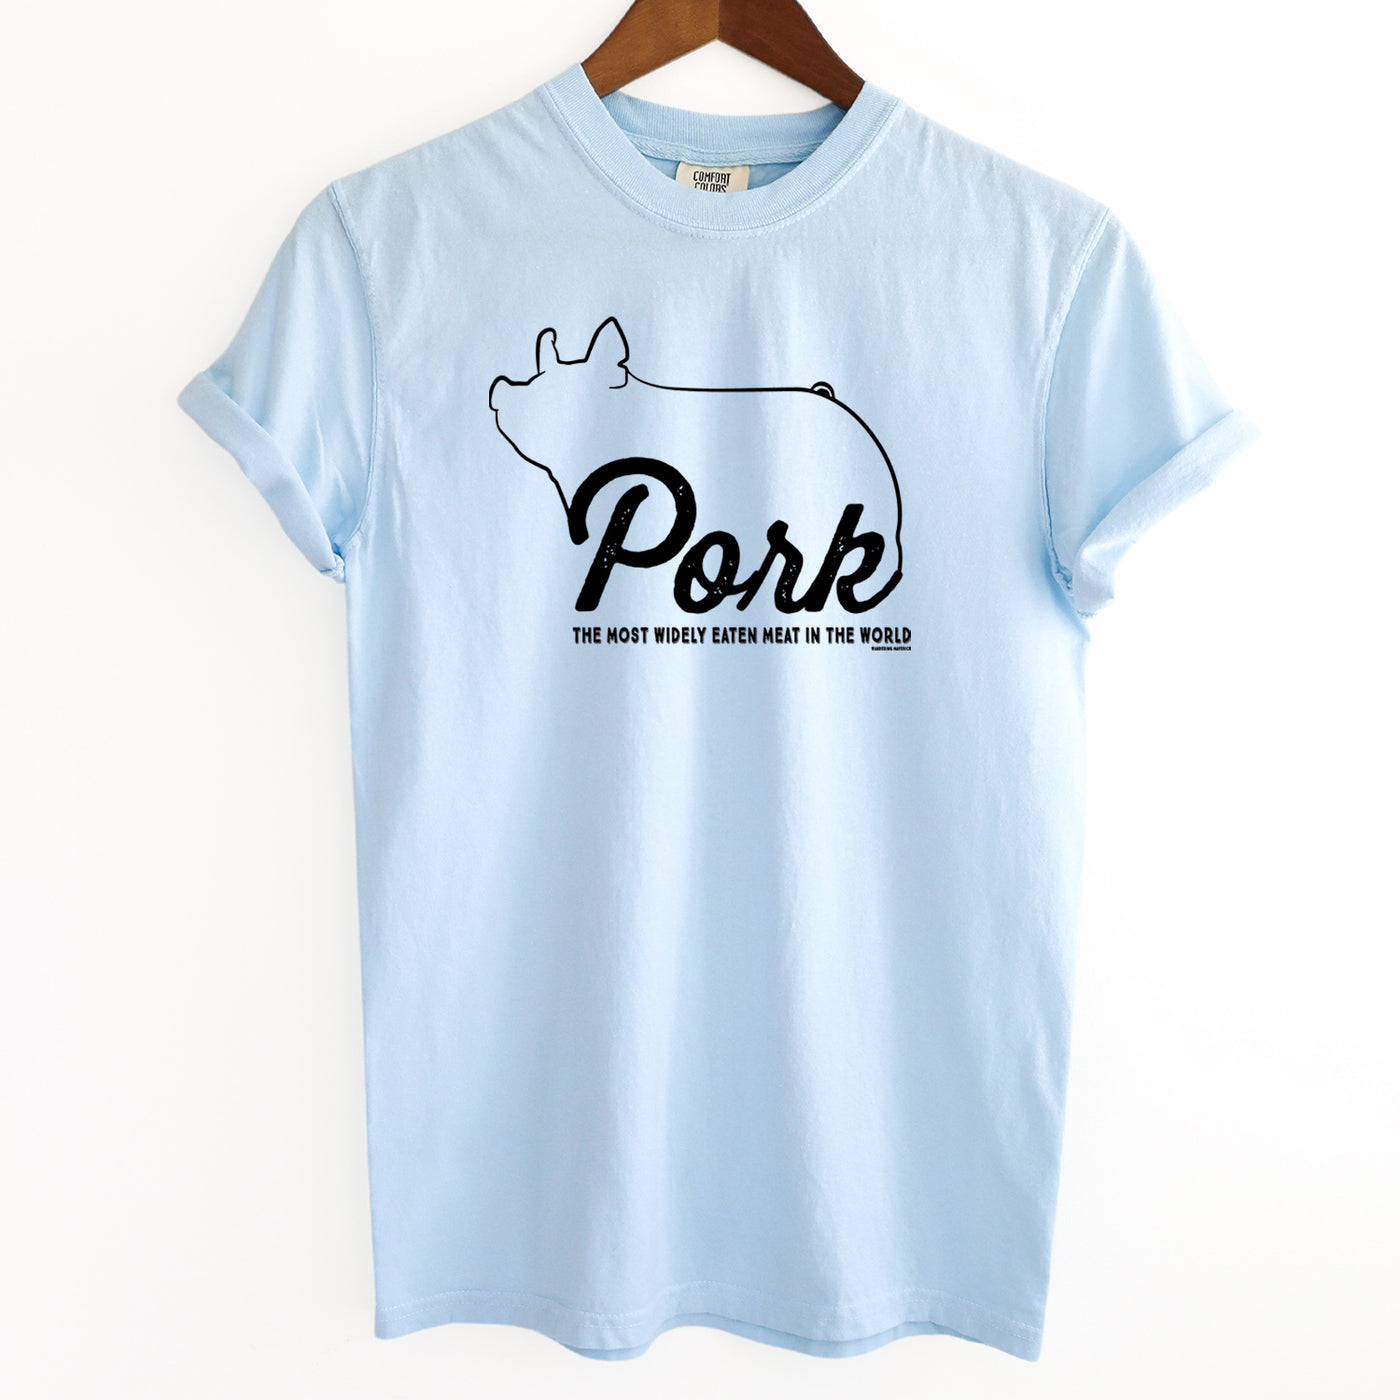 Pork - The Most Widely Eaten Meat In The World ComfortWash/ComfortColor T-Shirt (S-4XL) - Multiple Colors!